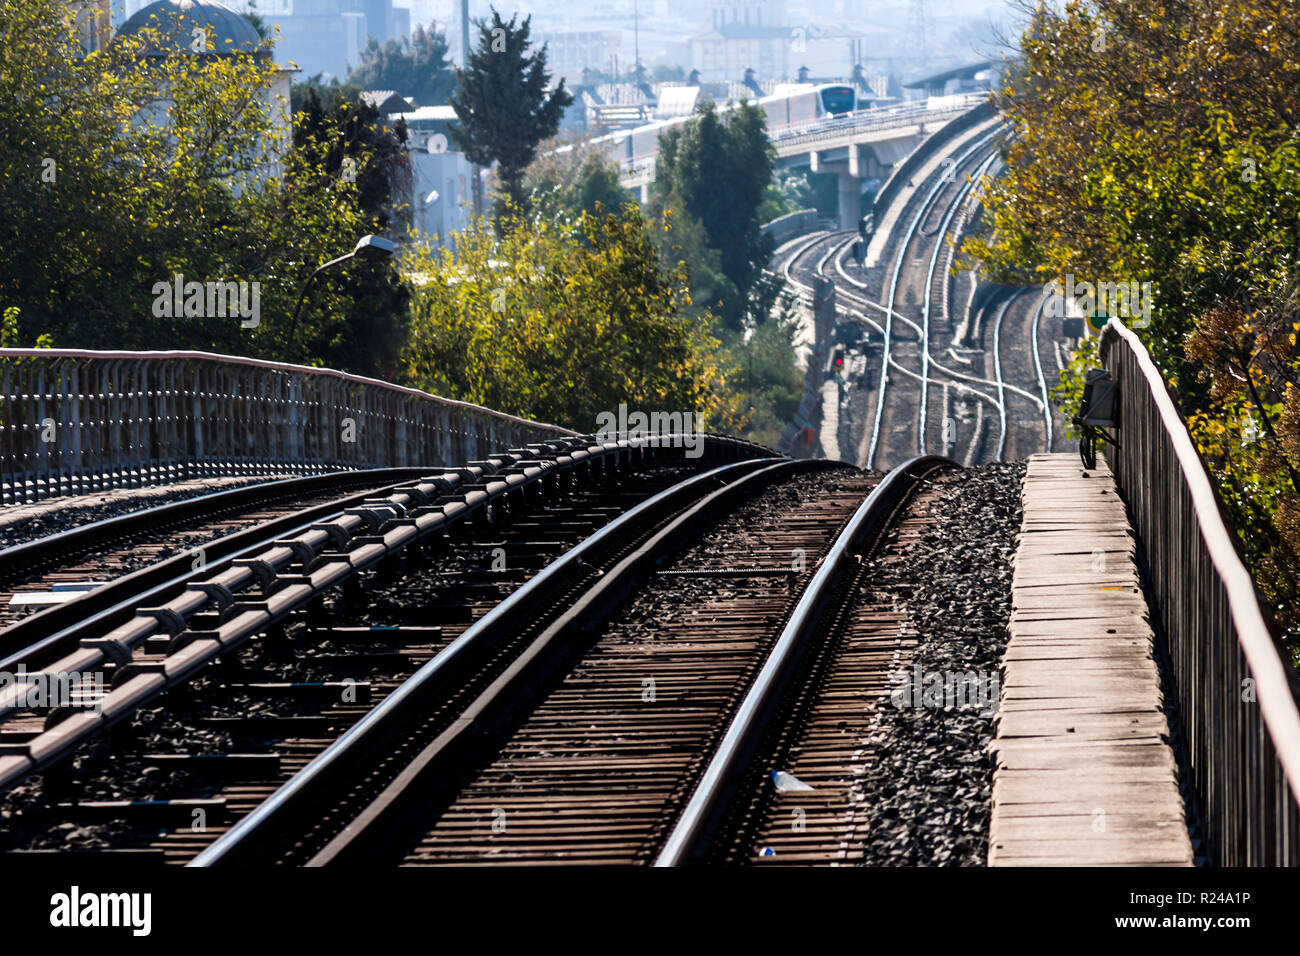 Looking to the railway system of the metro of Izmir (Turkey) - photography Stock Photo